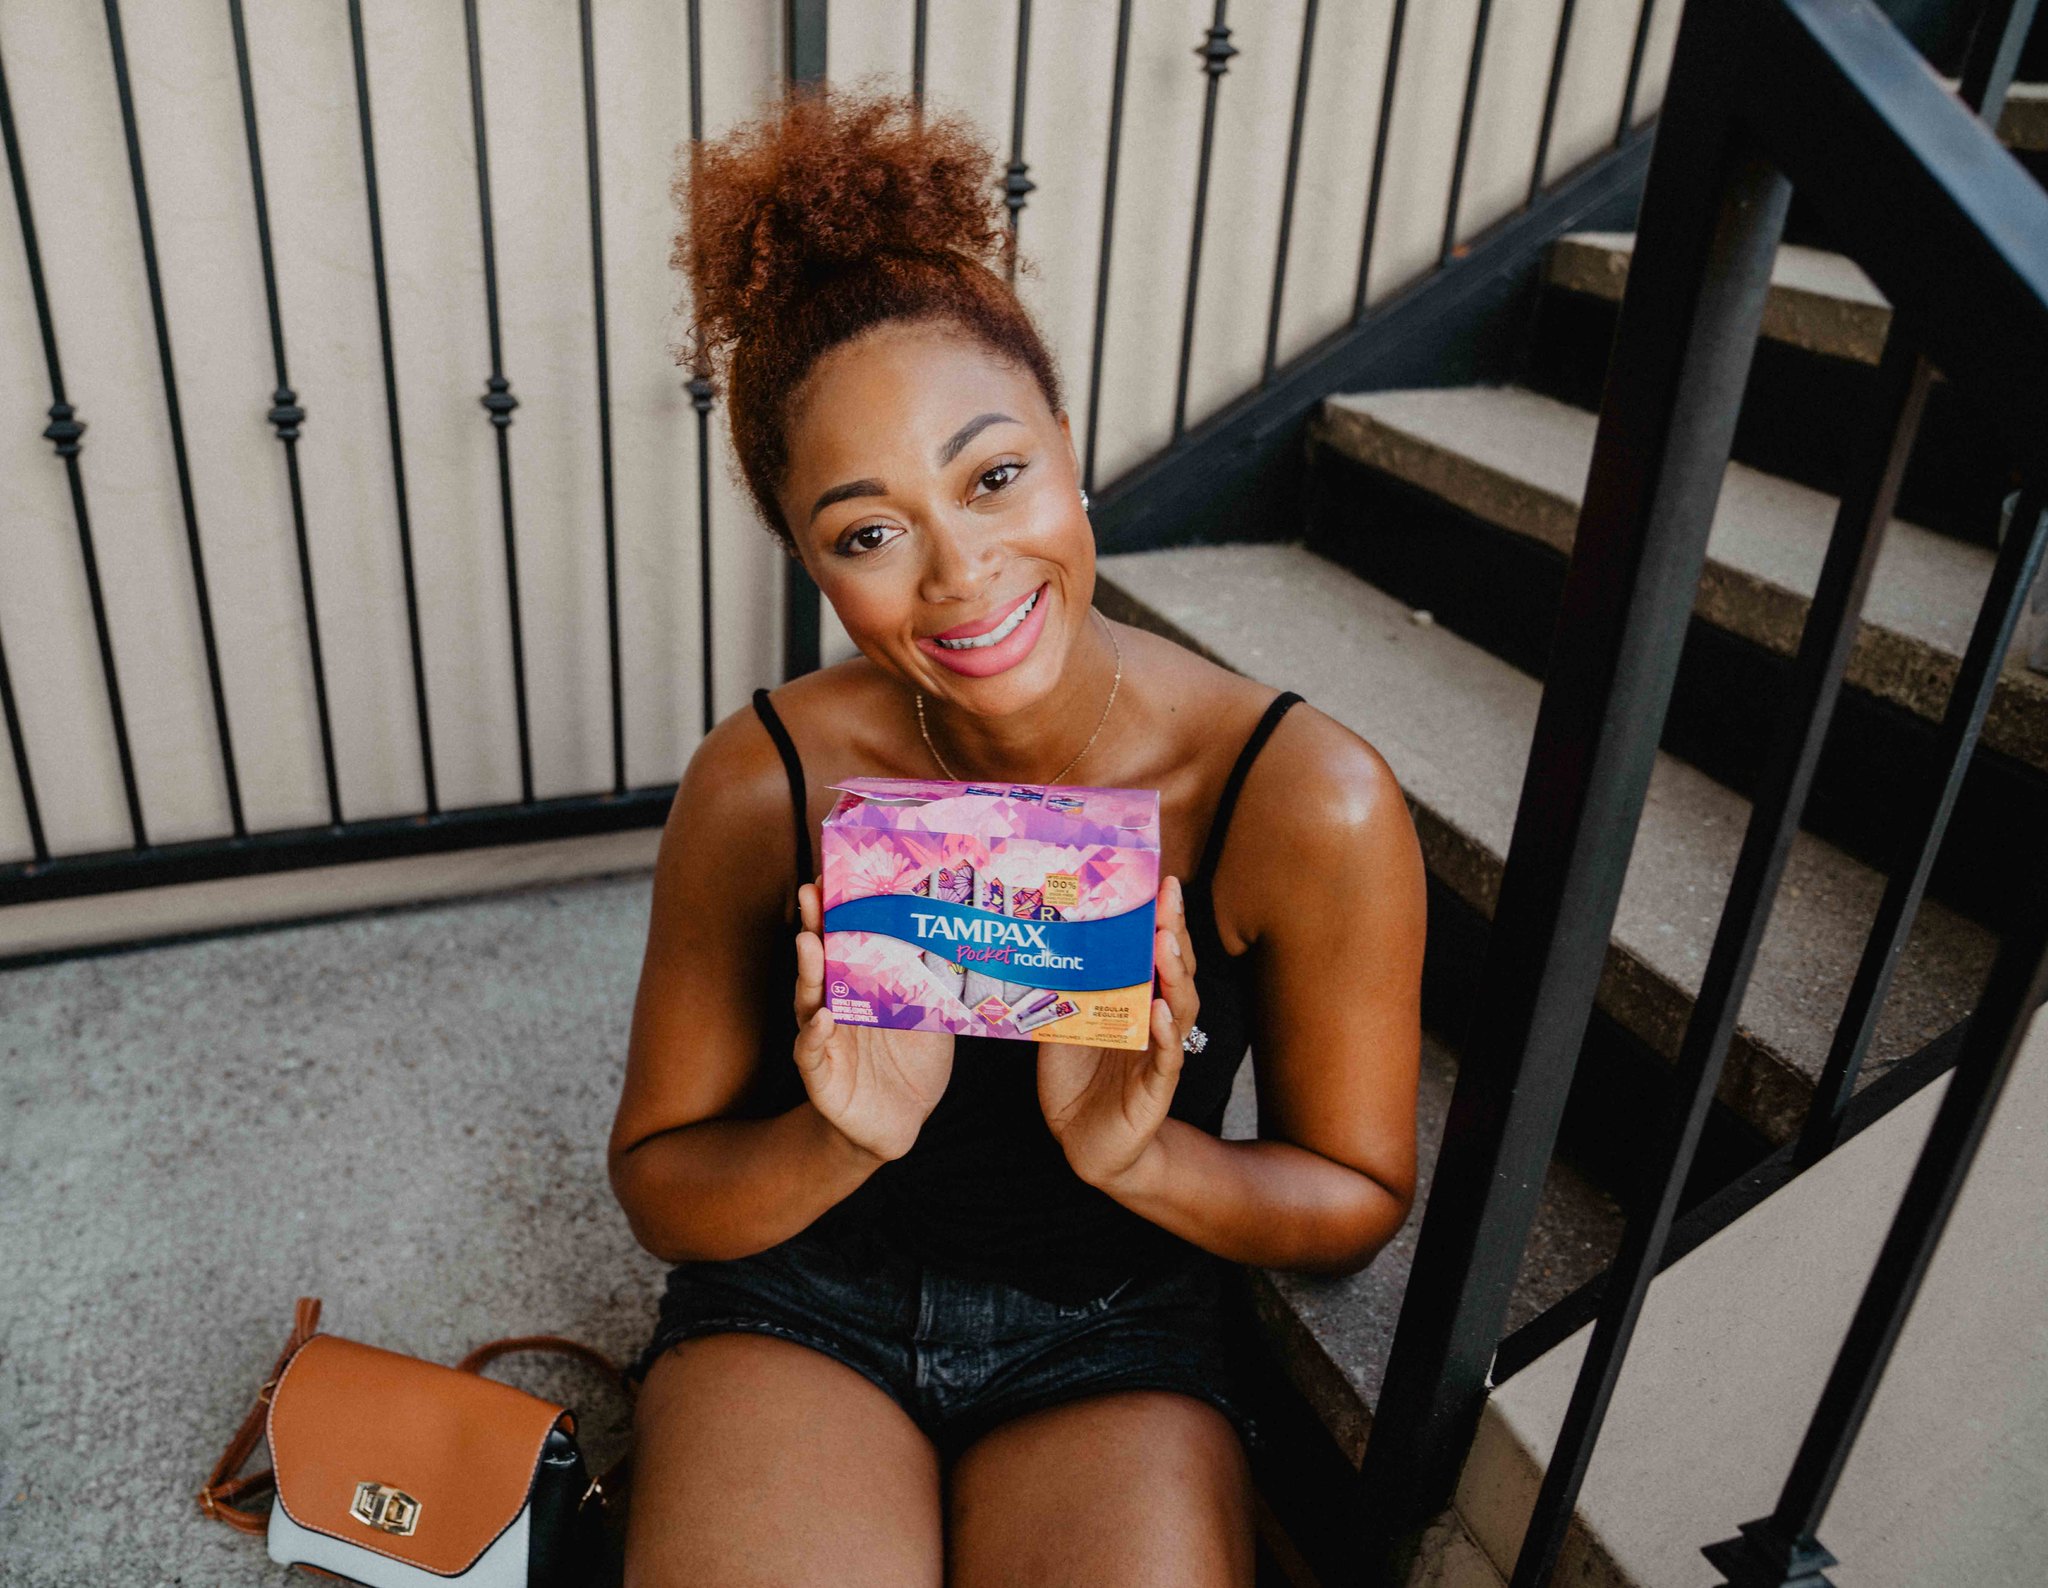 Tampax pocket radiance review